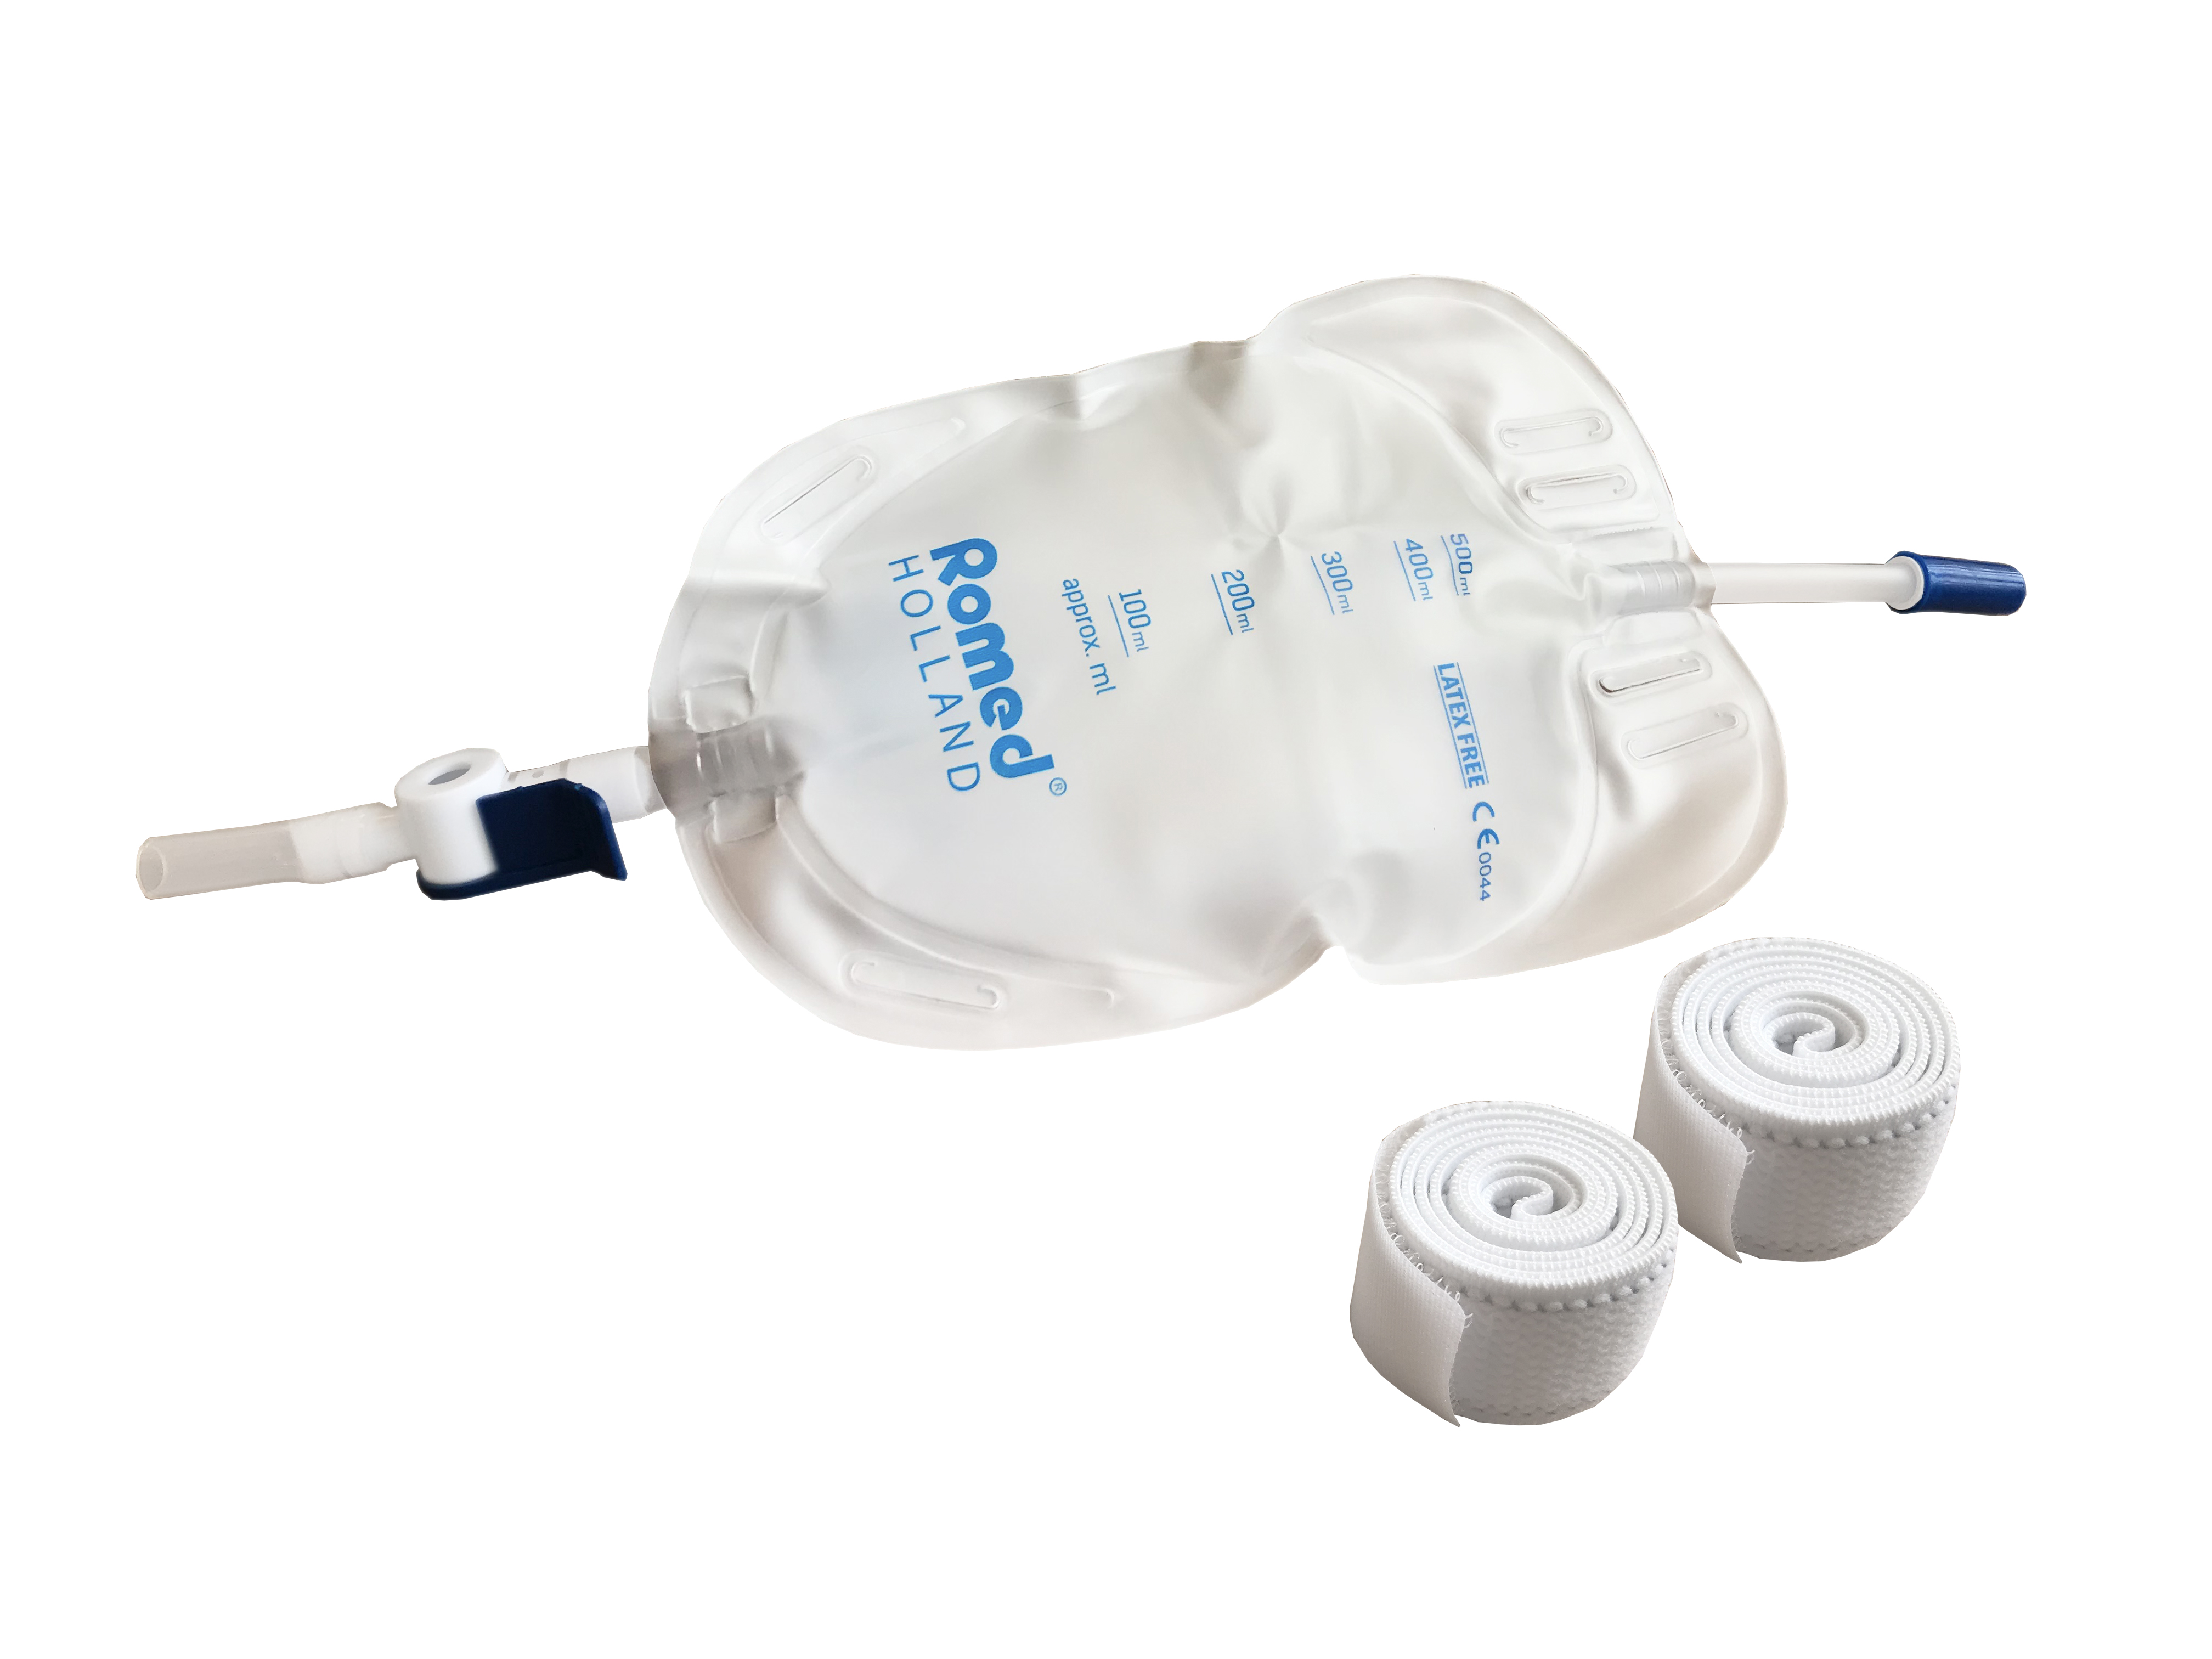 LB750ML-SOFT Romed urine leg bags soft, 750ml with non return valve and lever tap, sterile packed per piece, 10 pcs in a box, 80 pcs in an export carton.